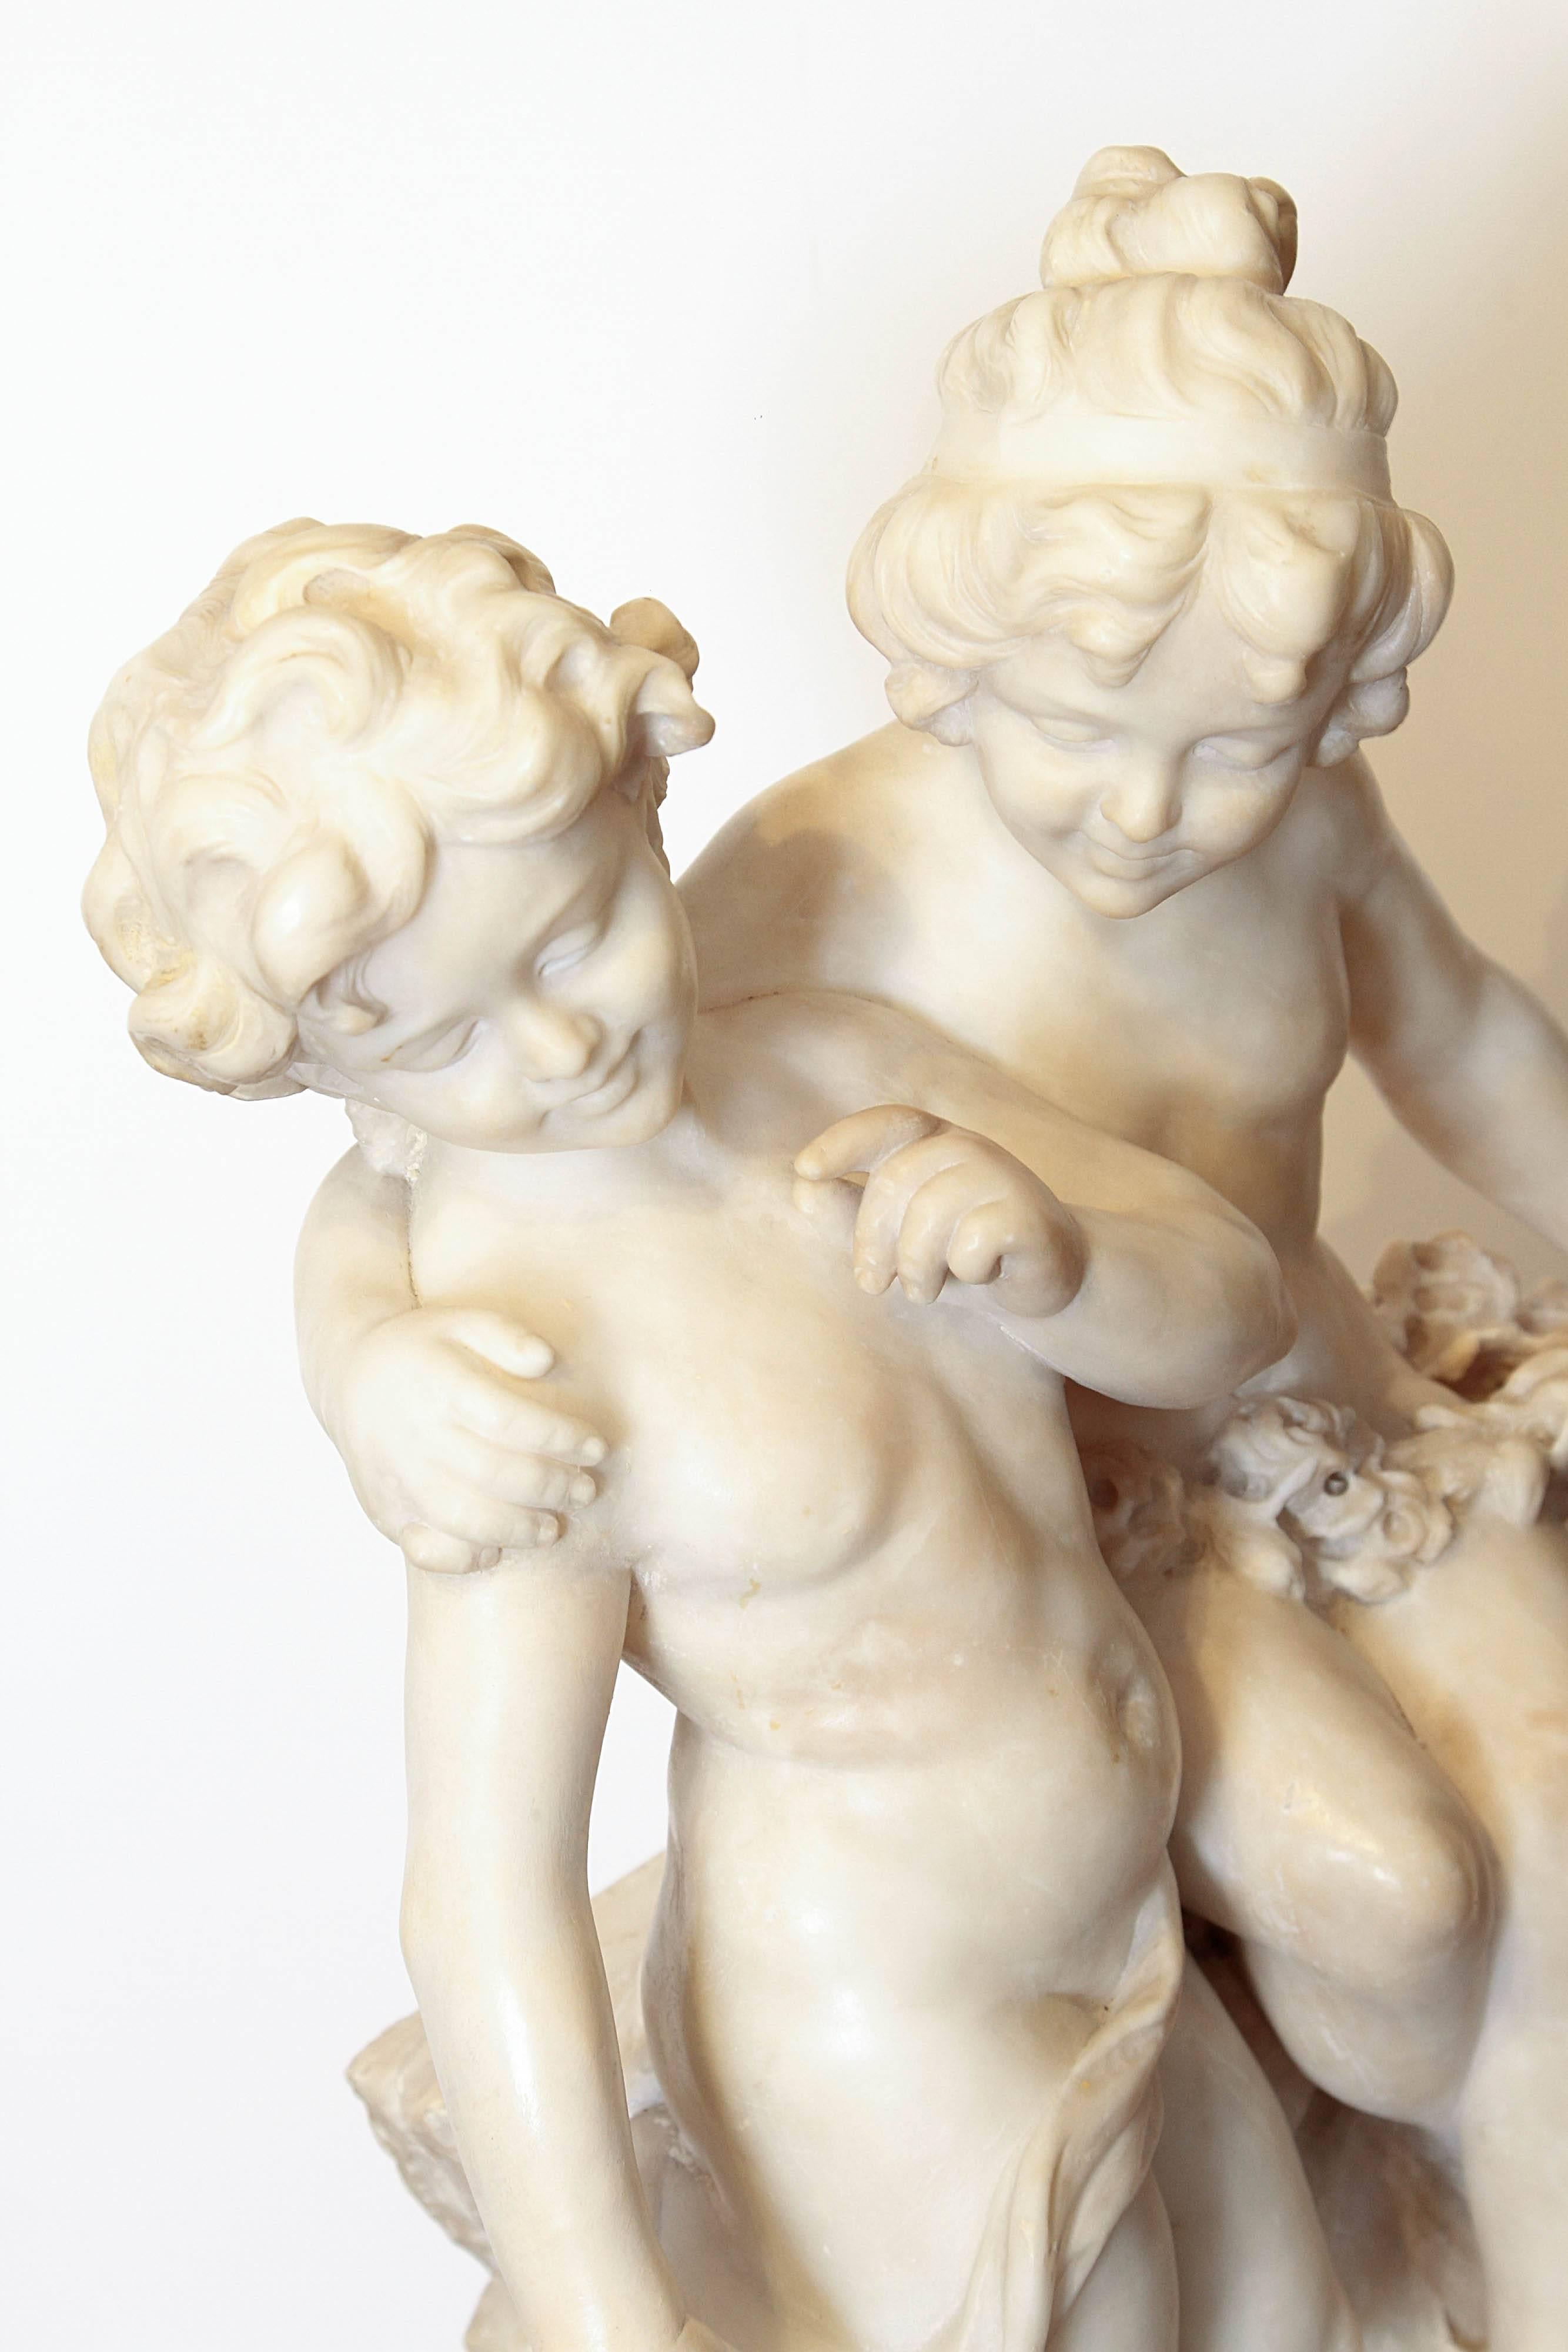 19th Century Italian Marble Sculpture of Two Children Sitting on a Wall 1